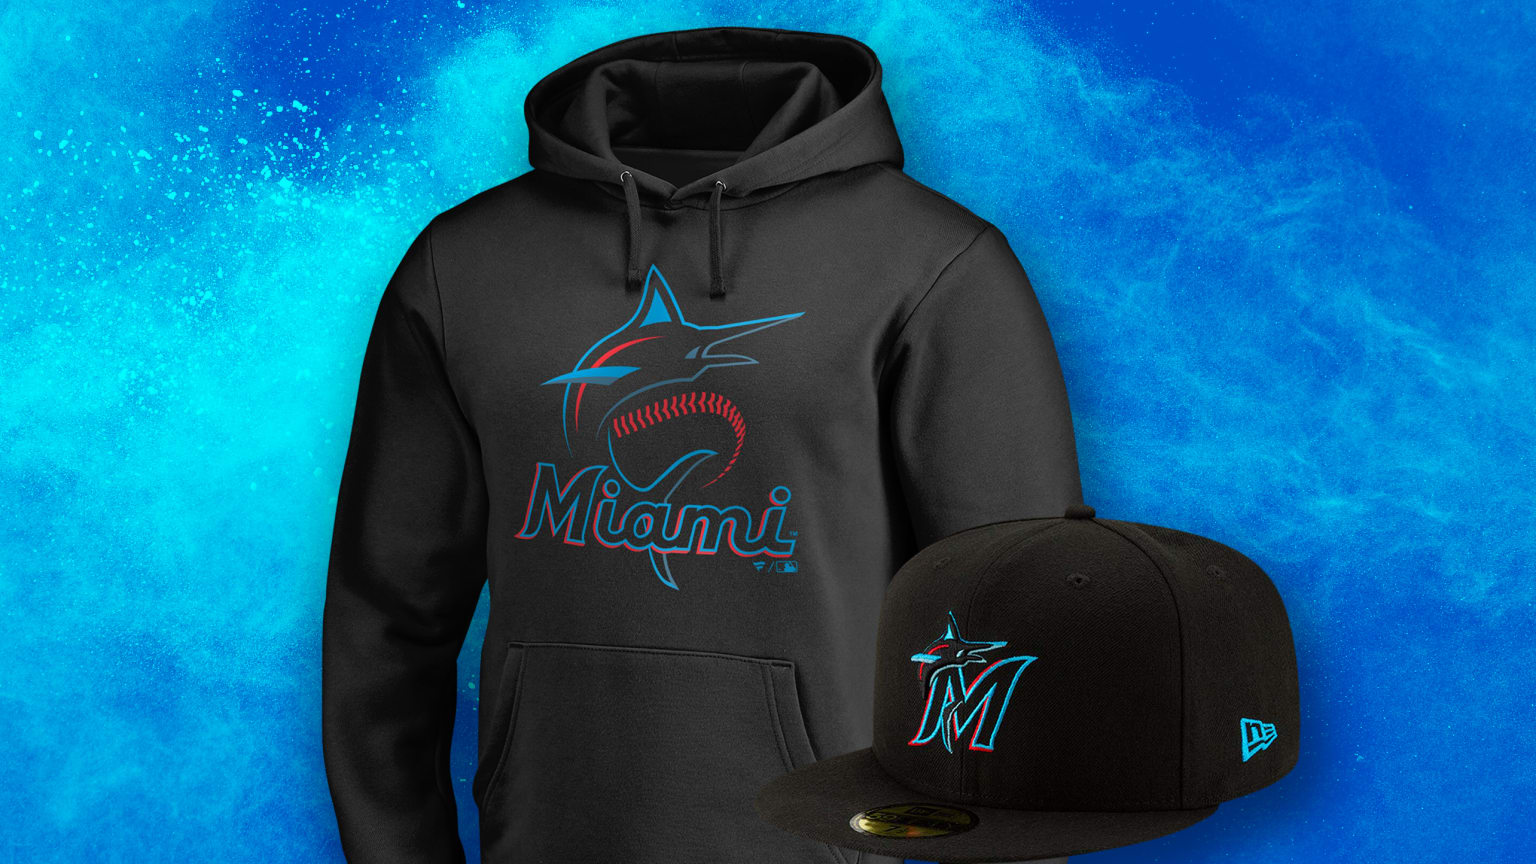 Miami Marlins Spring Training Gift Guide